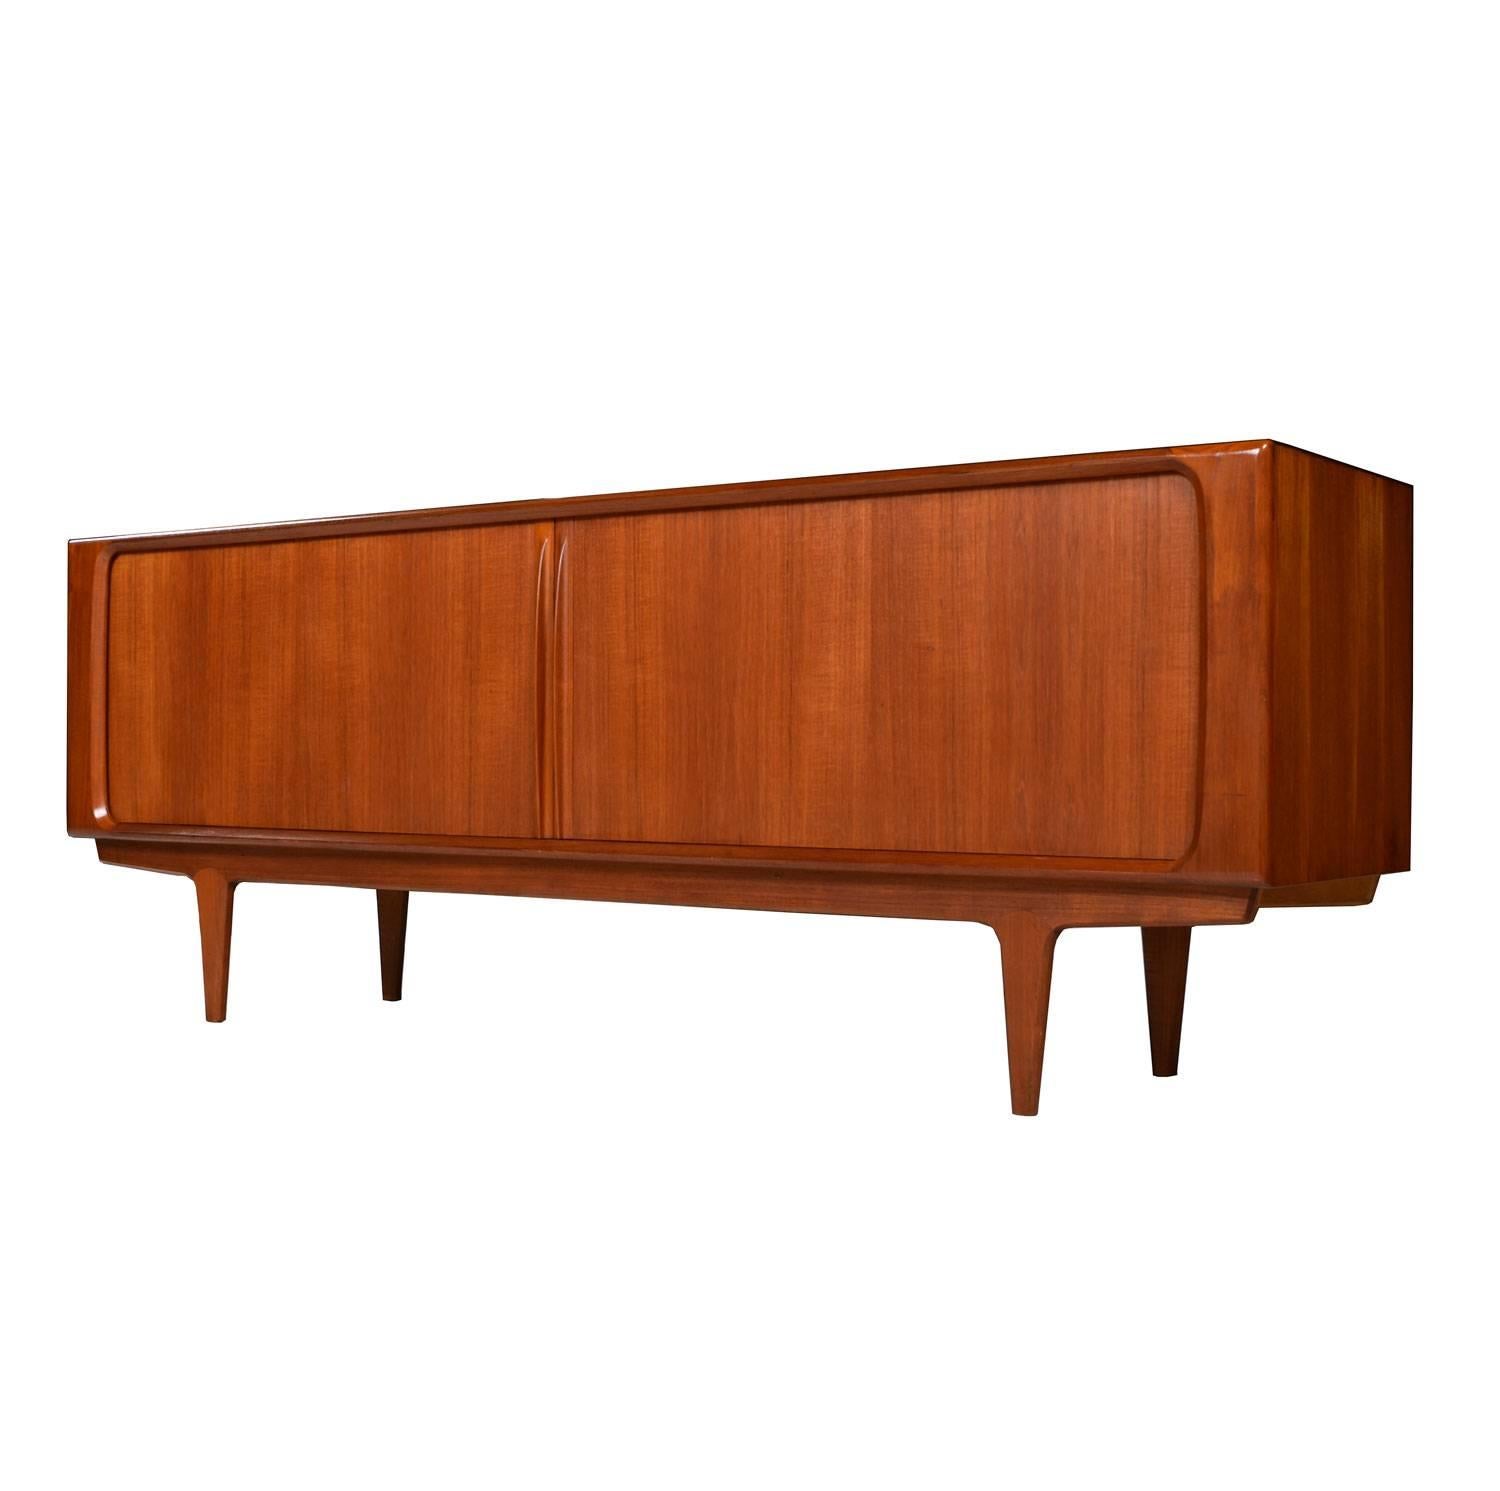 Long Mid-Century Modern Danish teak credenza by Bernhard Pedersen. Expertly crafted with sleek lip-like, solid teak carved handles gracing the tambour doors. Open the cabinet to reveal cabinet space at left and right. A stack of three drawers reside